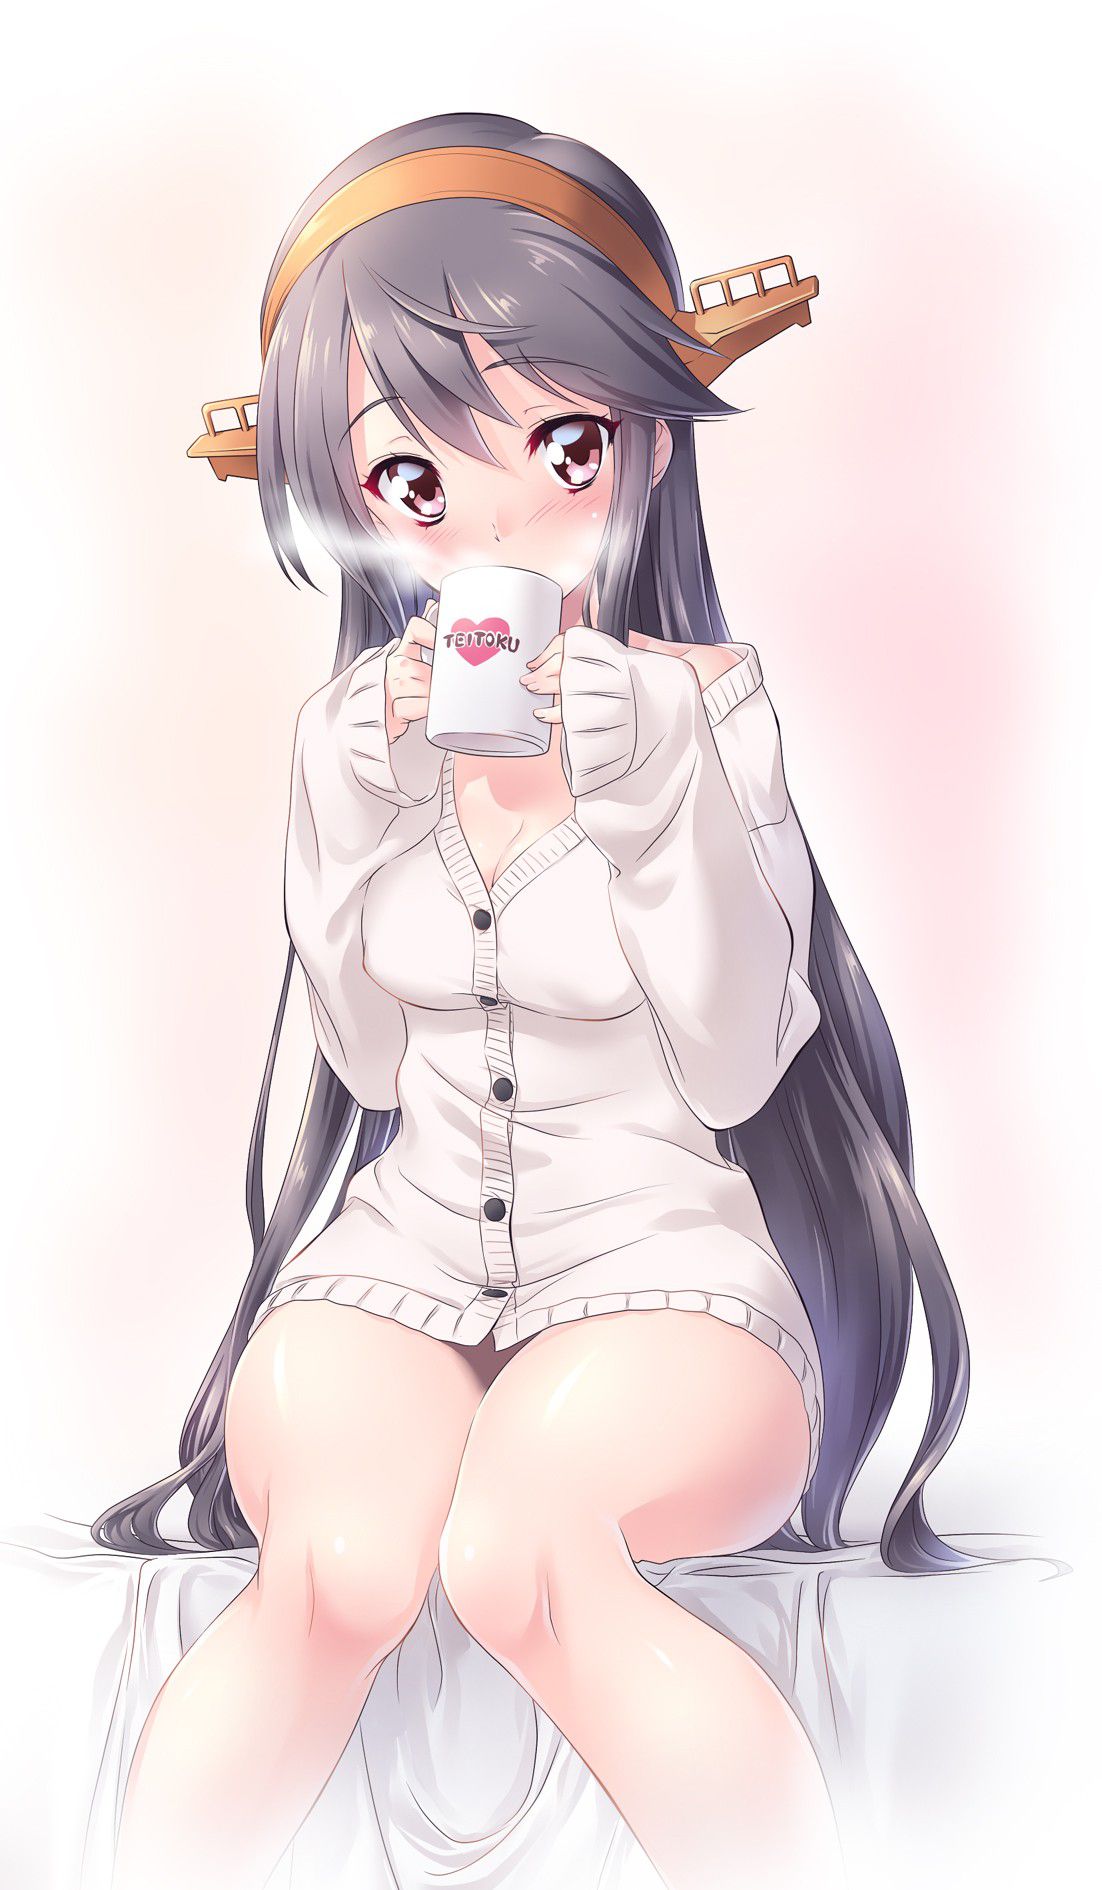 Secondary image of a cute girl who is drinking a drink [non-erotic] 15